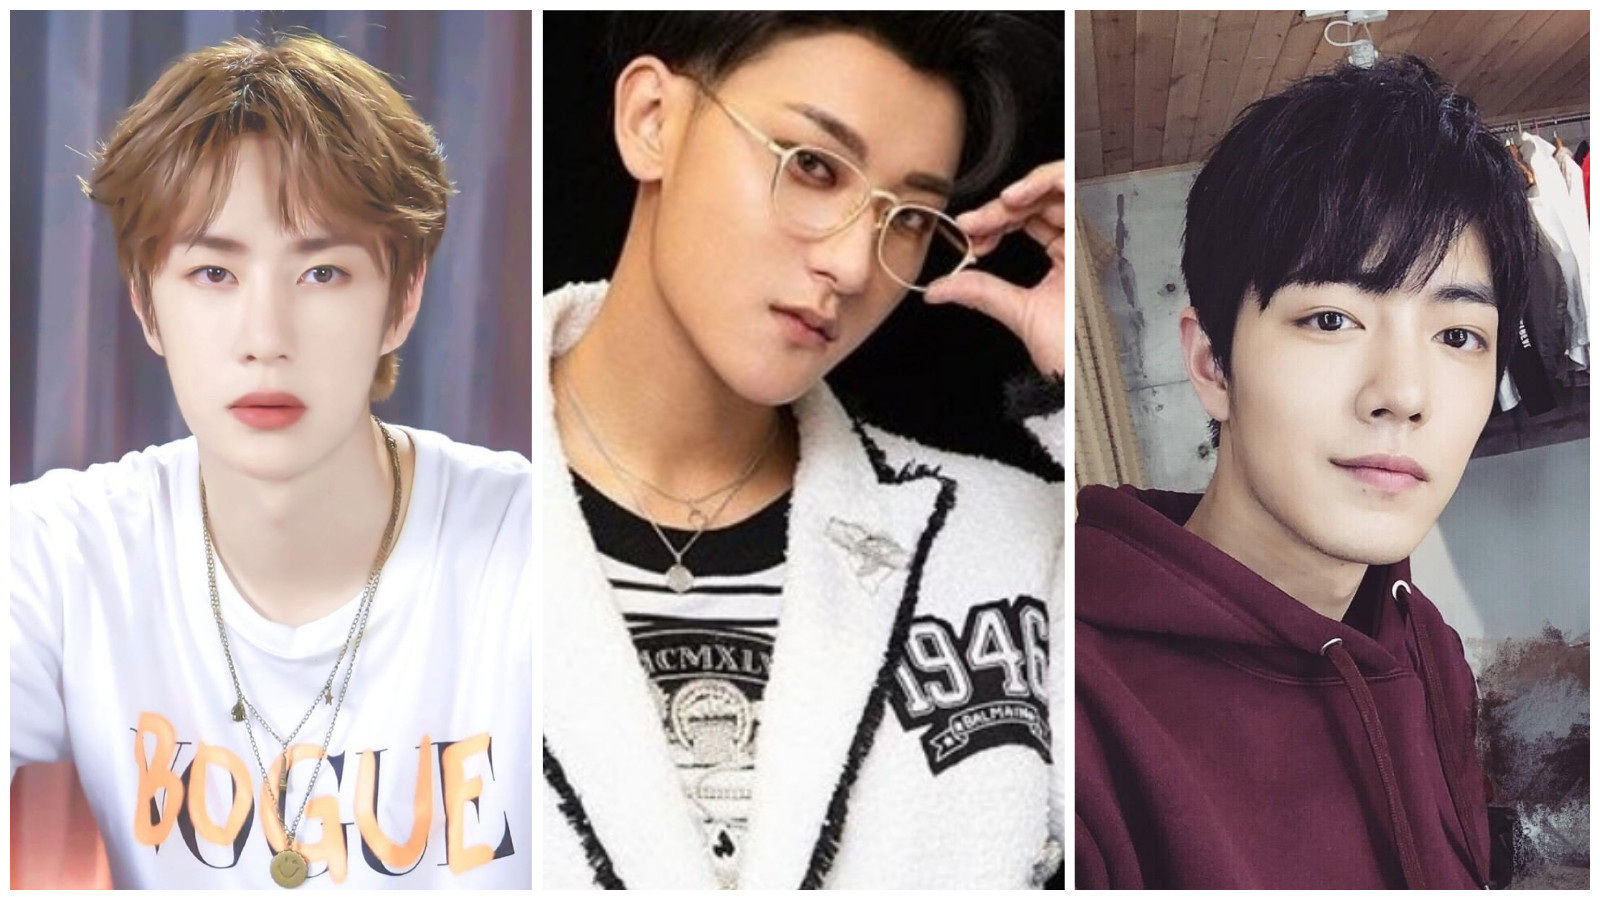 Wang Yibo, former Exo member Huang Zitao, Xiao Zhan and other Chinese celebrities have donated towards flood relief efforts in Henan. Photos: @yibo.85__w; @hztttao; @xiaozhan.daytoy/Instagram